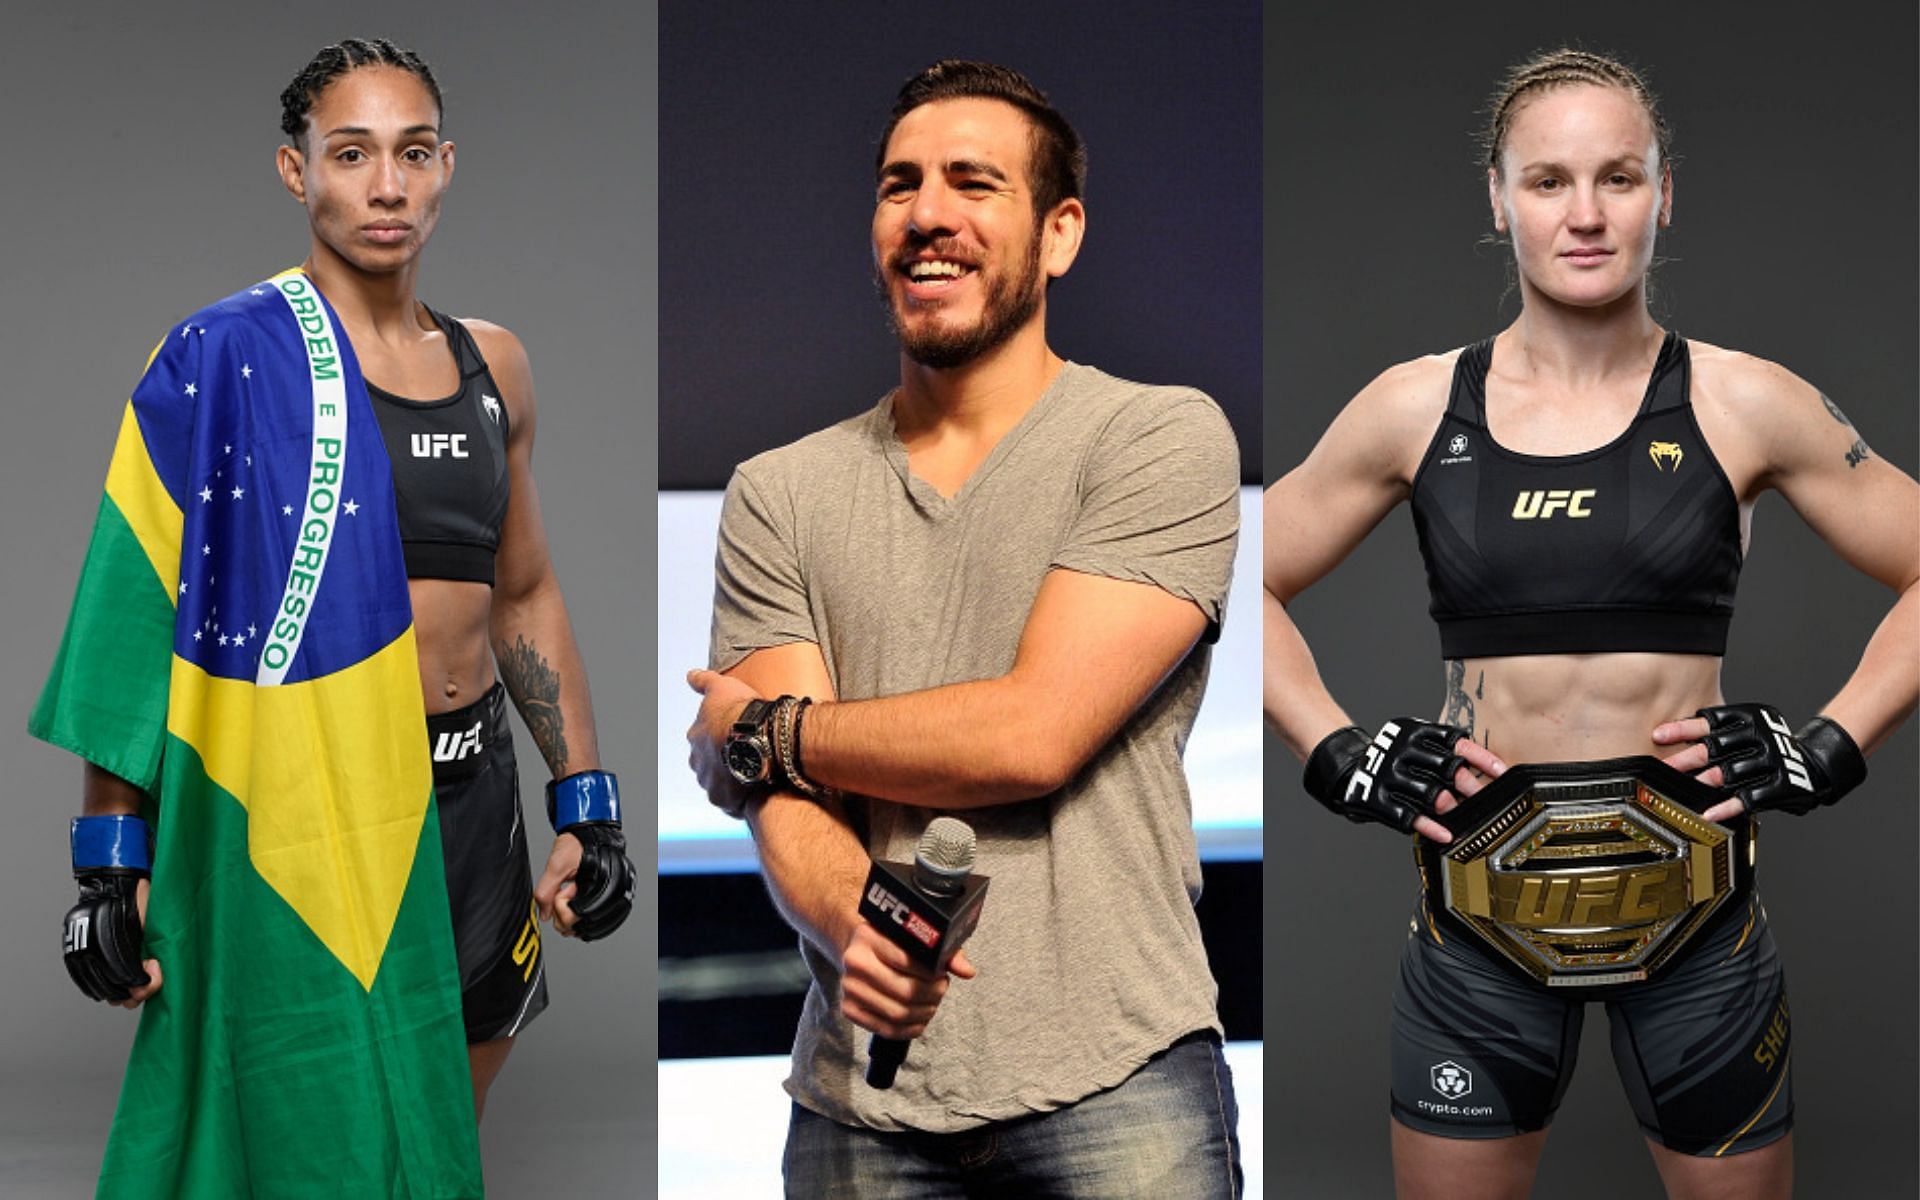 Taila Santos (left), Kenny Florian (middle), and Valentina Shevchenko (right) (Images via Getty)